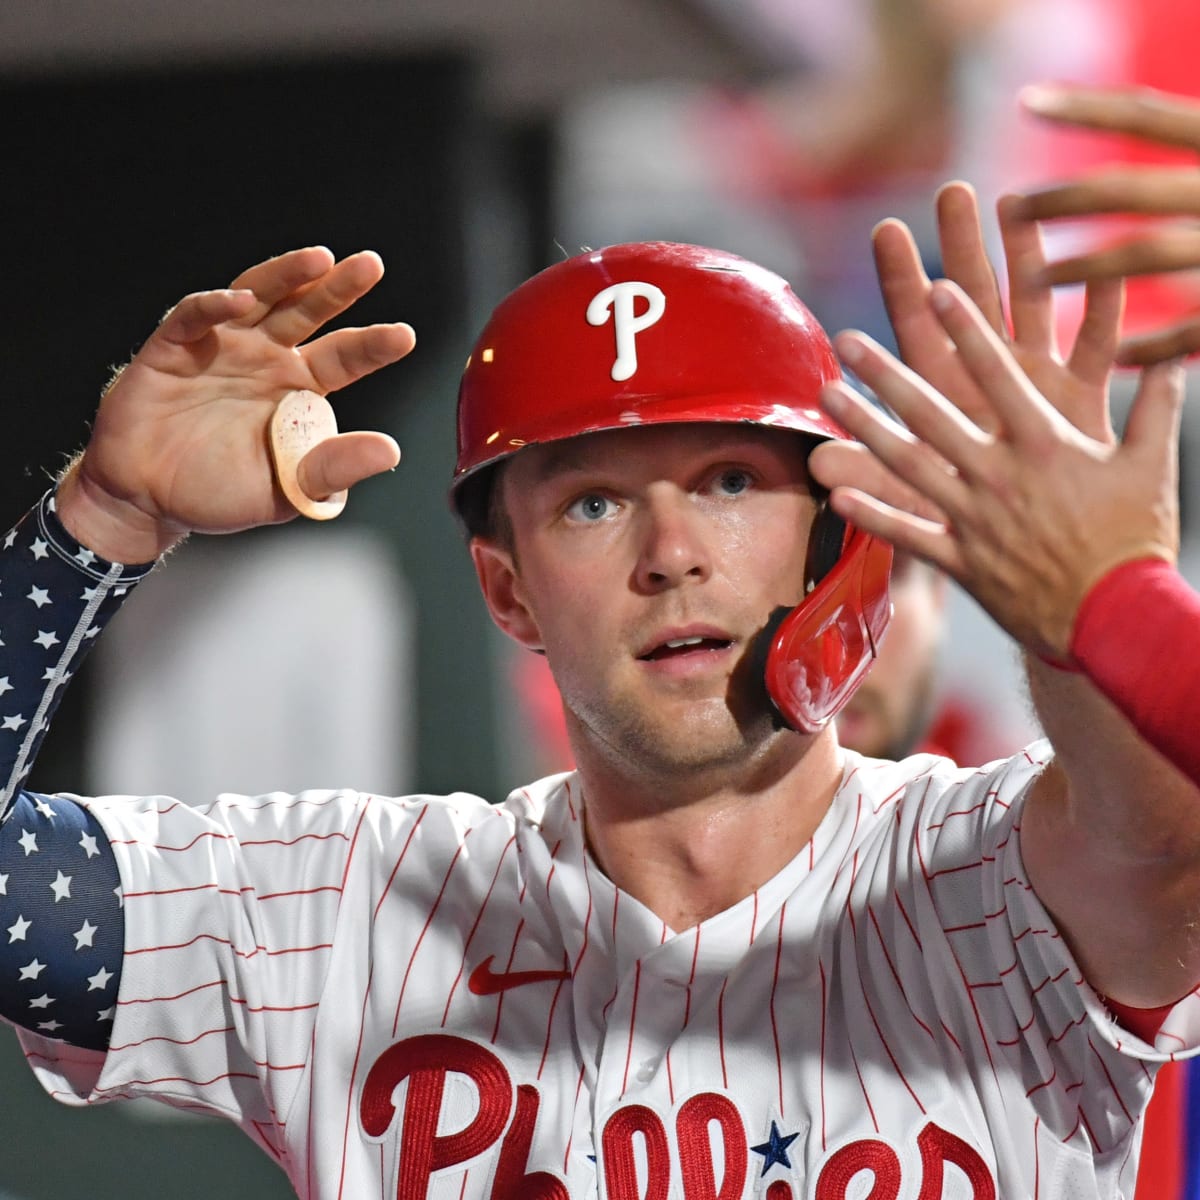 What will Phillies do without Rhys Hoskins in the lineup? 